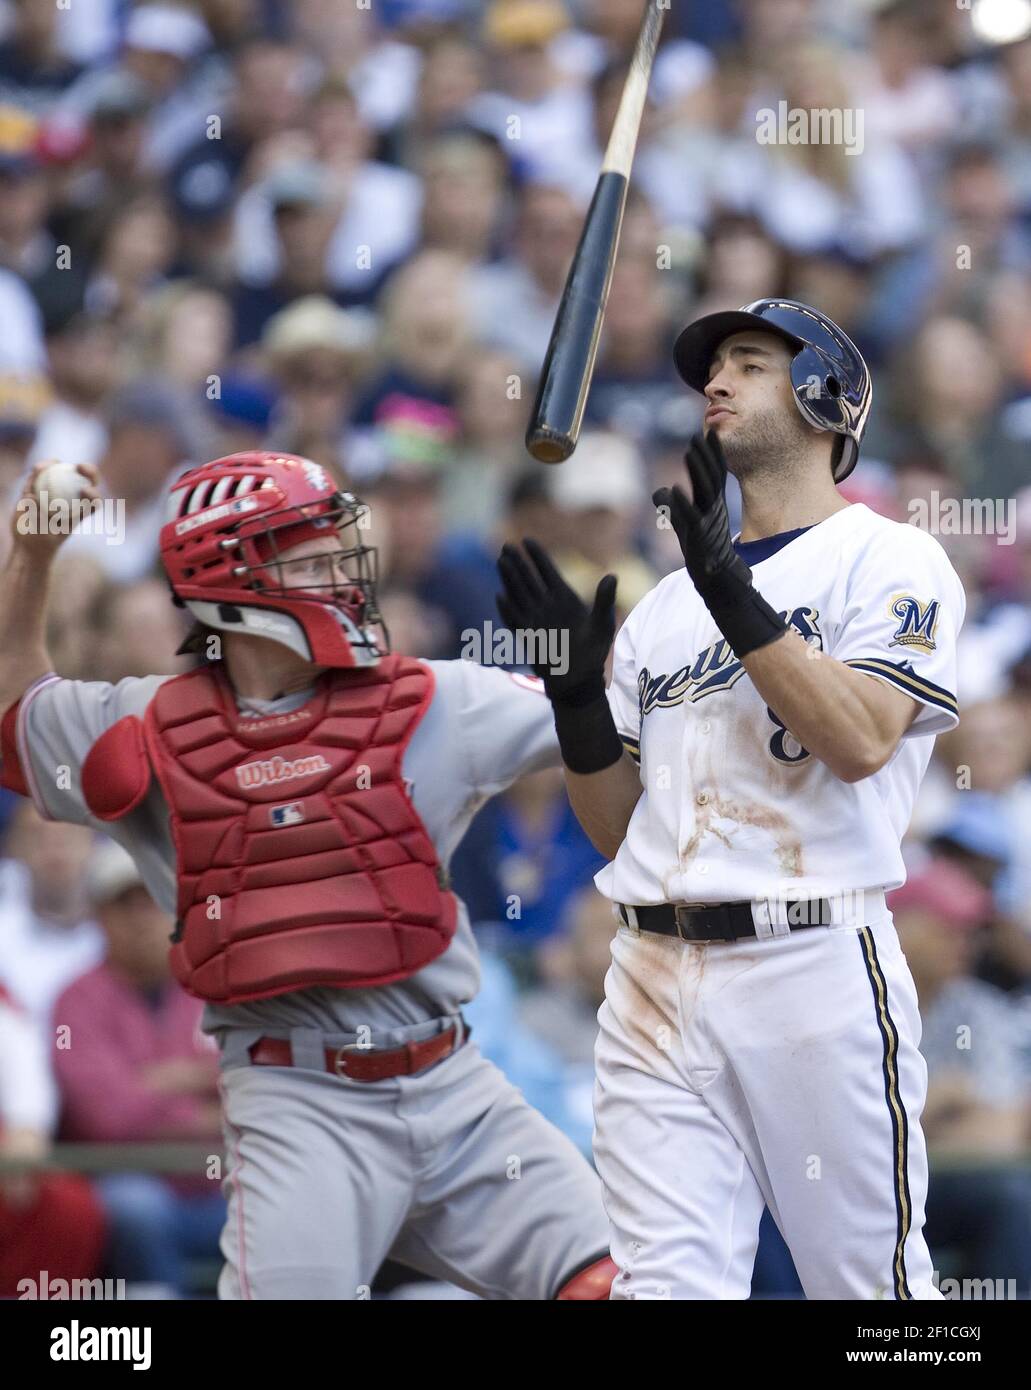 Relive bat flip by Brewers' Ryan Braun on Friday vs. Pirates